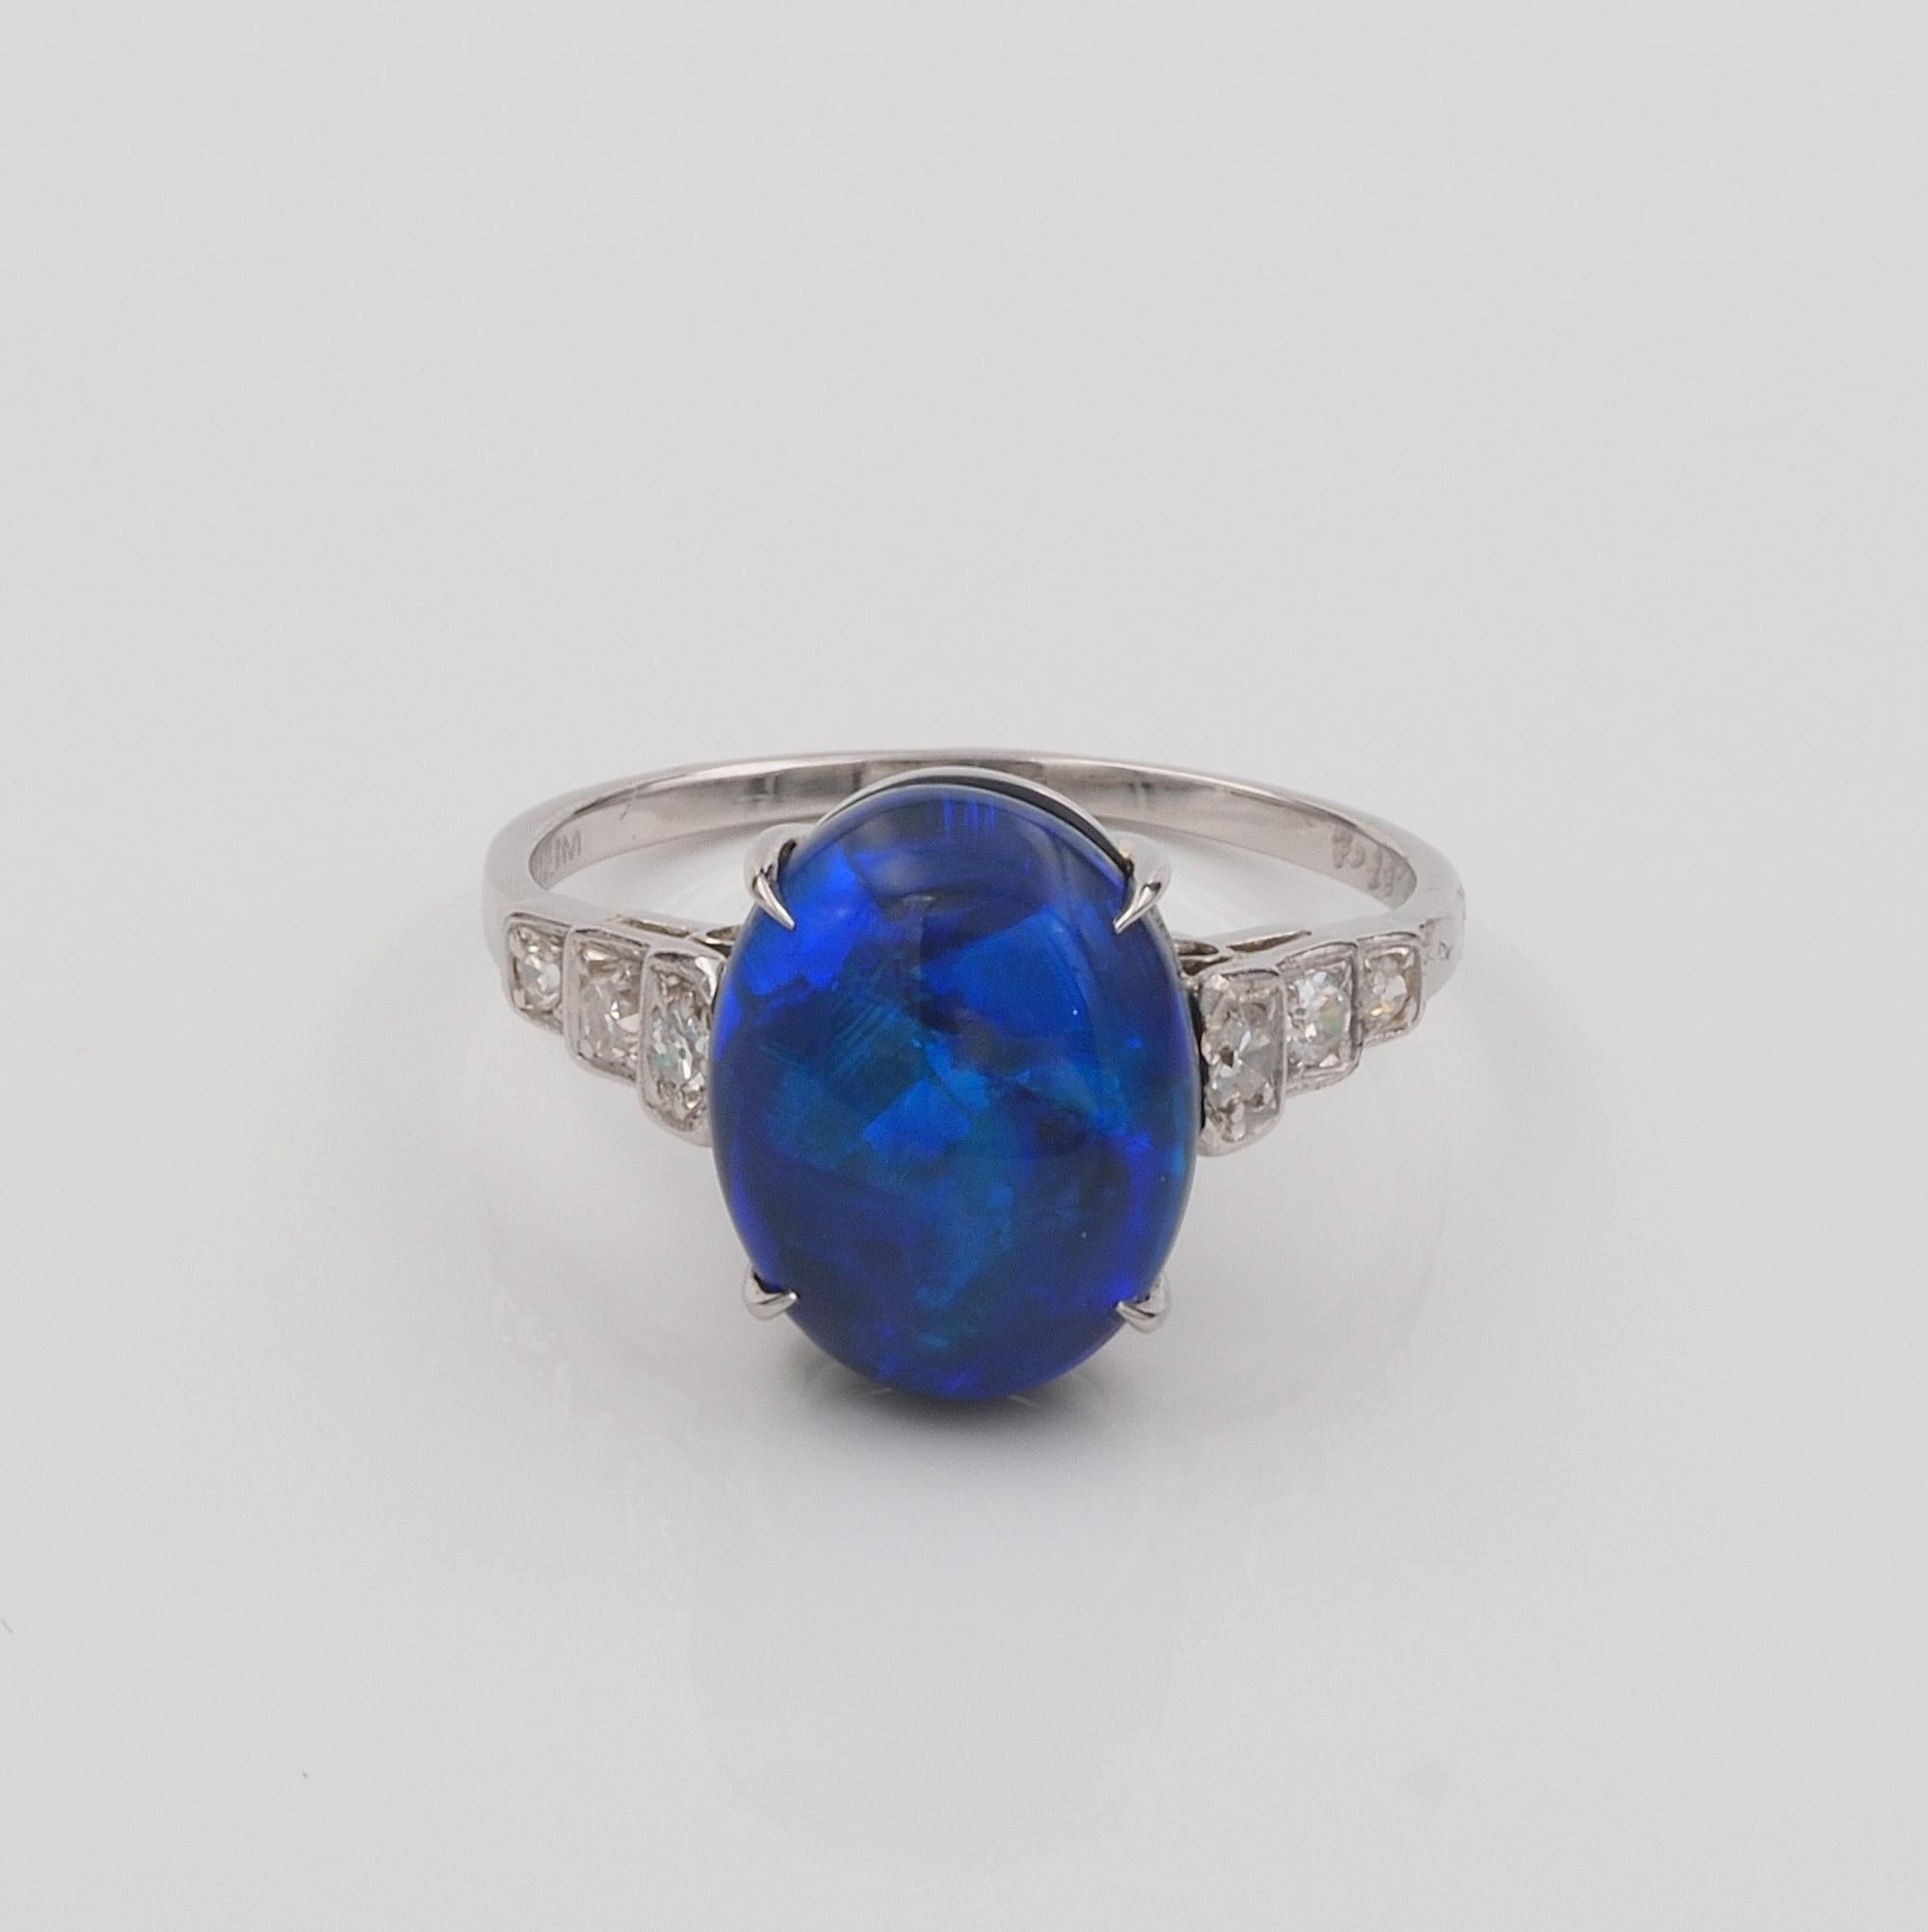 This striking vintage ring is 1930 ca.
Hand crafted of solid Platinum as unique at the highest standards
The real star is the center solid Black Opal with Green and Blue flashes on a dark body, Australian origin, 3.87 Ct in weight (11.74 x 9.20